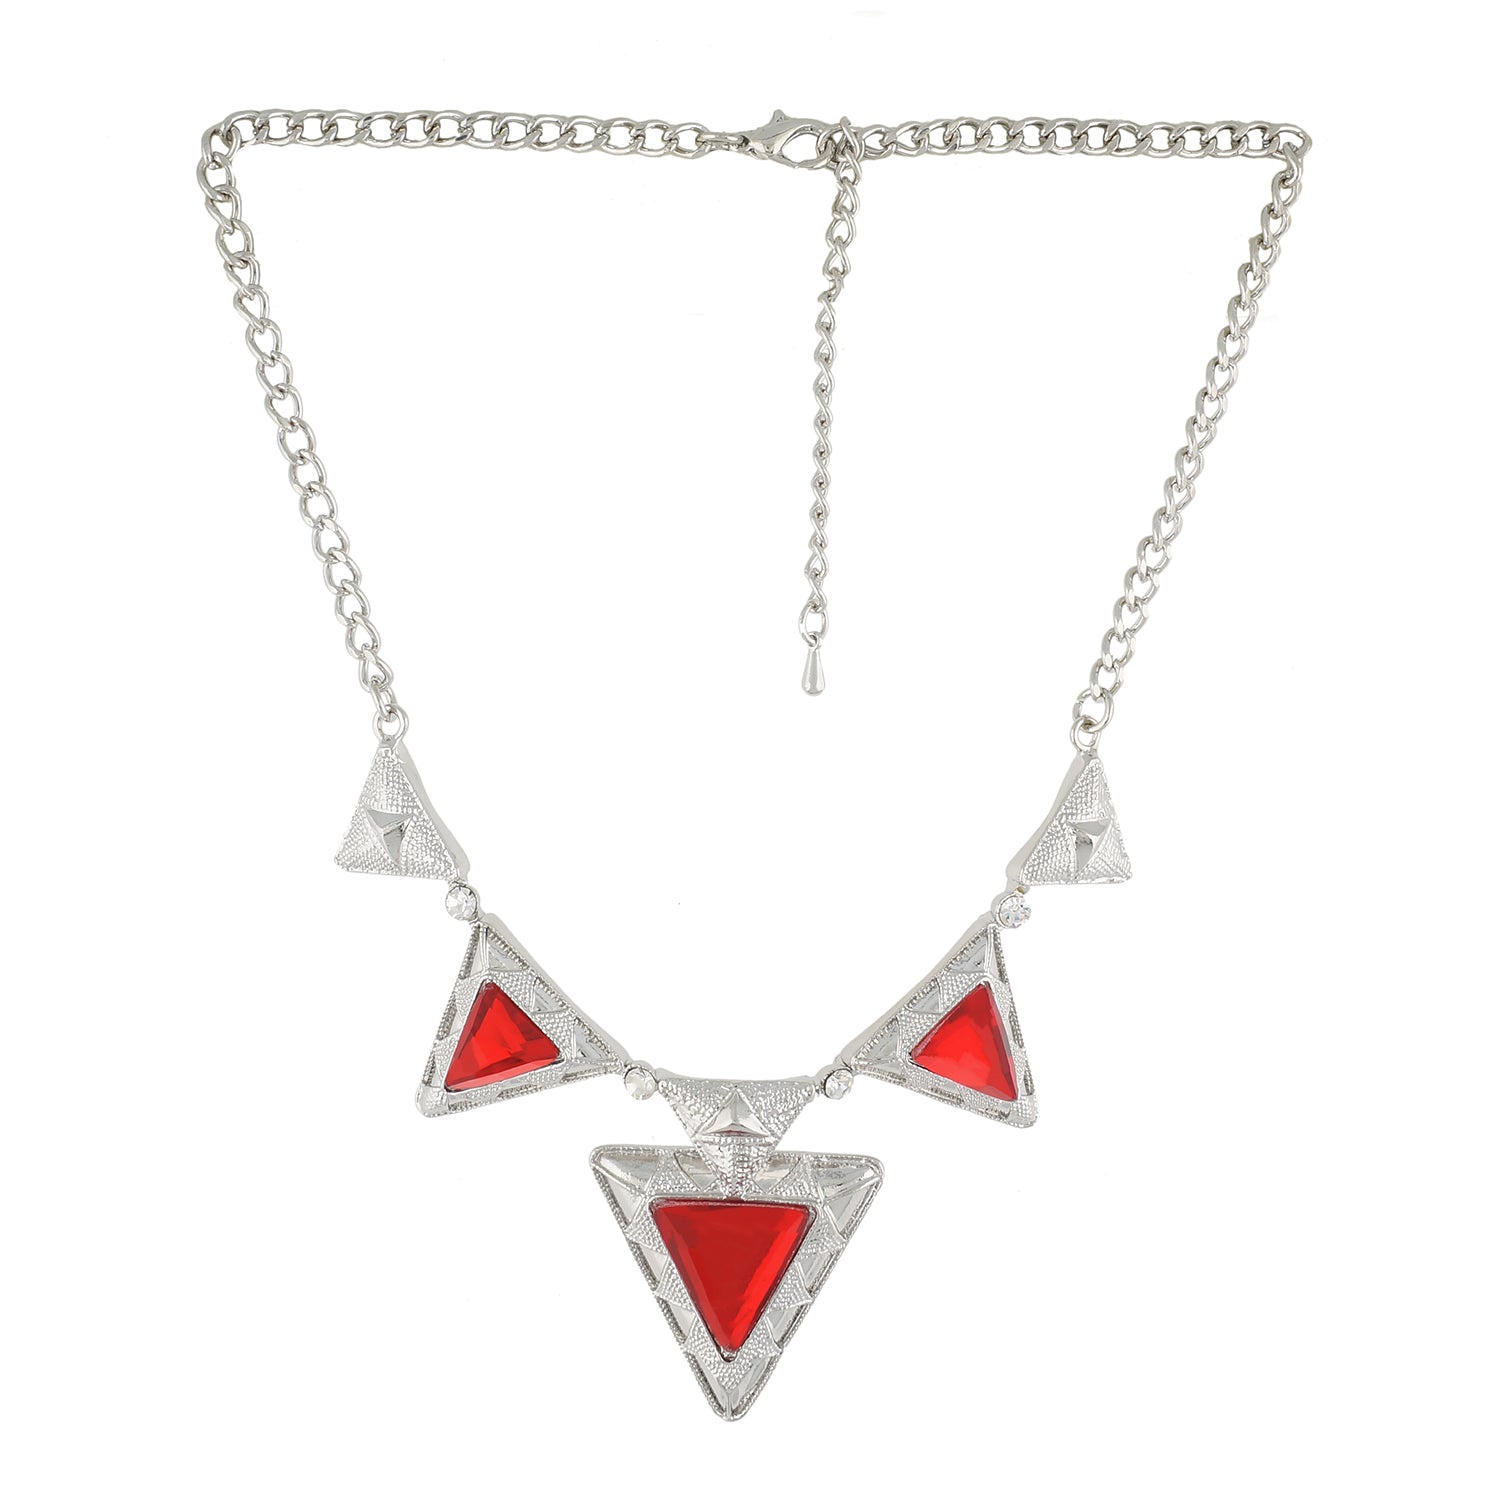 Red Colour Triangular Necklace and Earrings for Girls and Women